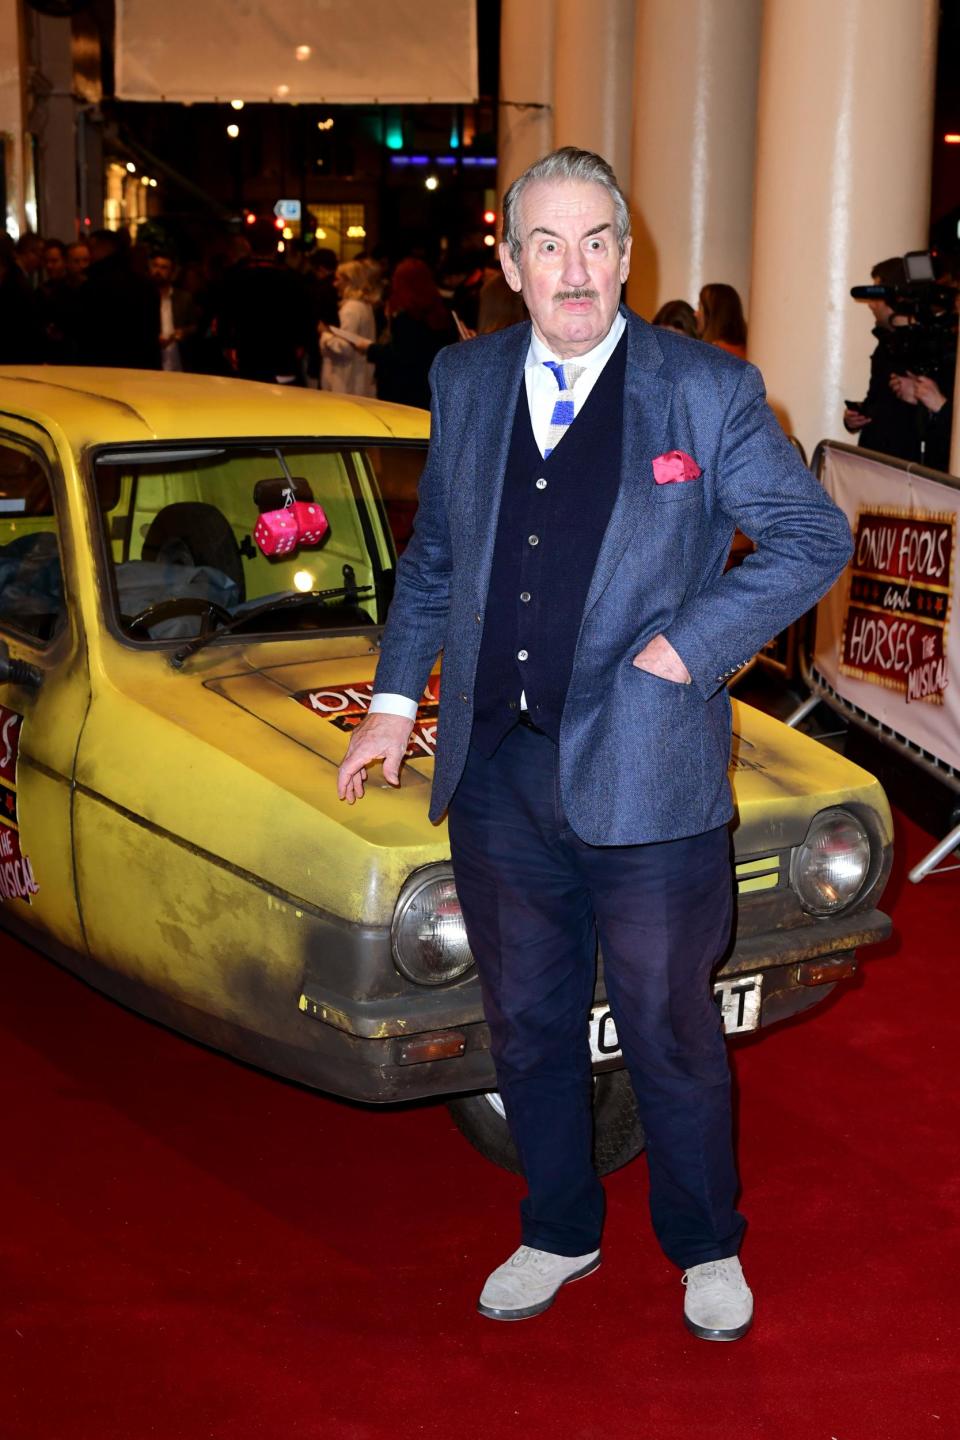 John Challis played the role of Boycie in Only Fools and Horses (PA)